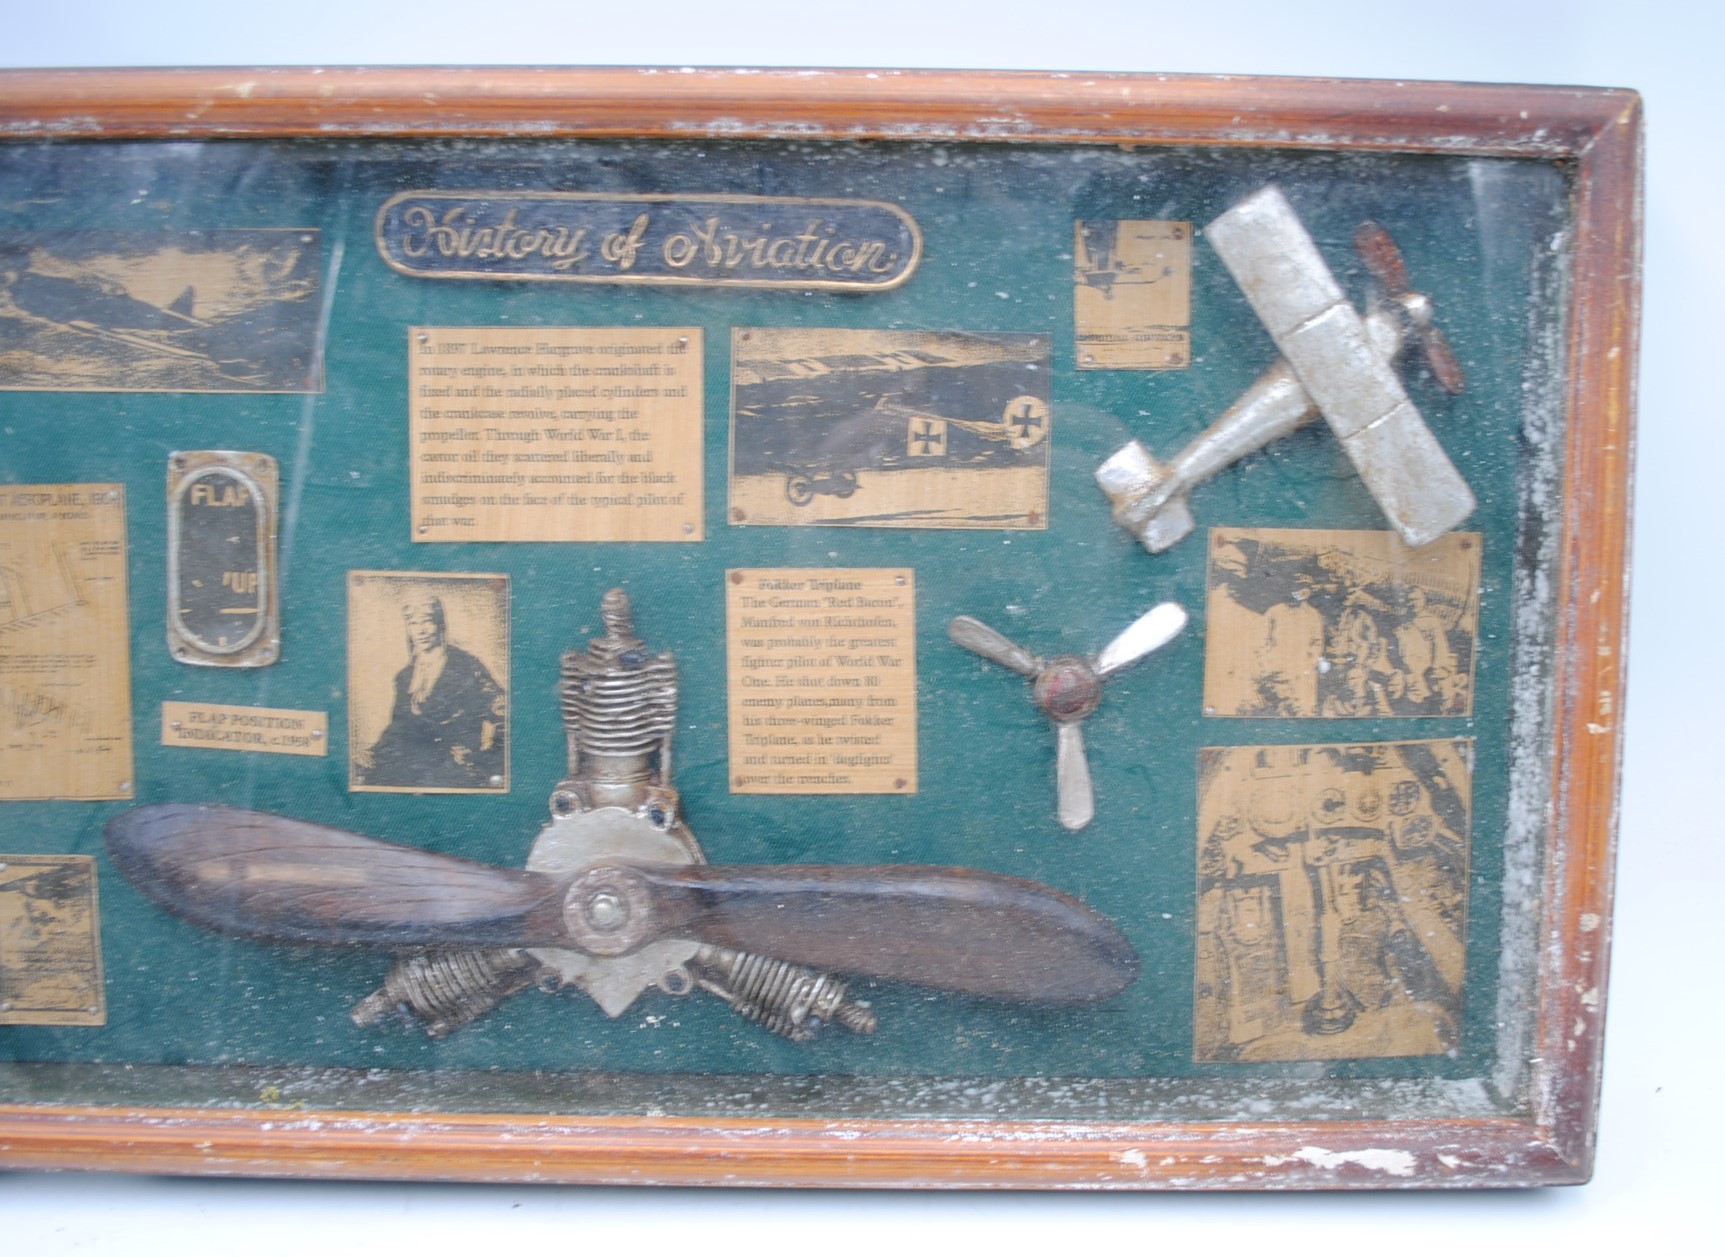 A 'History of Aviation' display case - 28.5cm x 52.5cm - Image 4 of 4